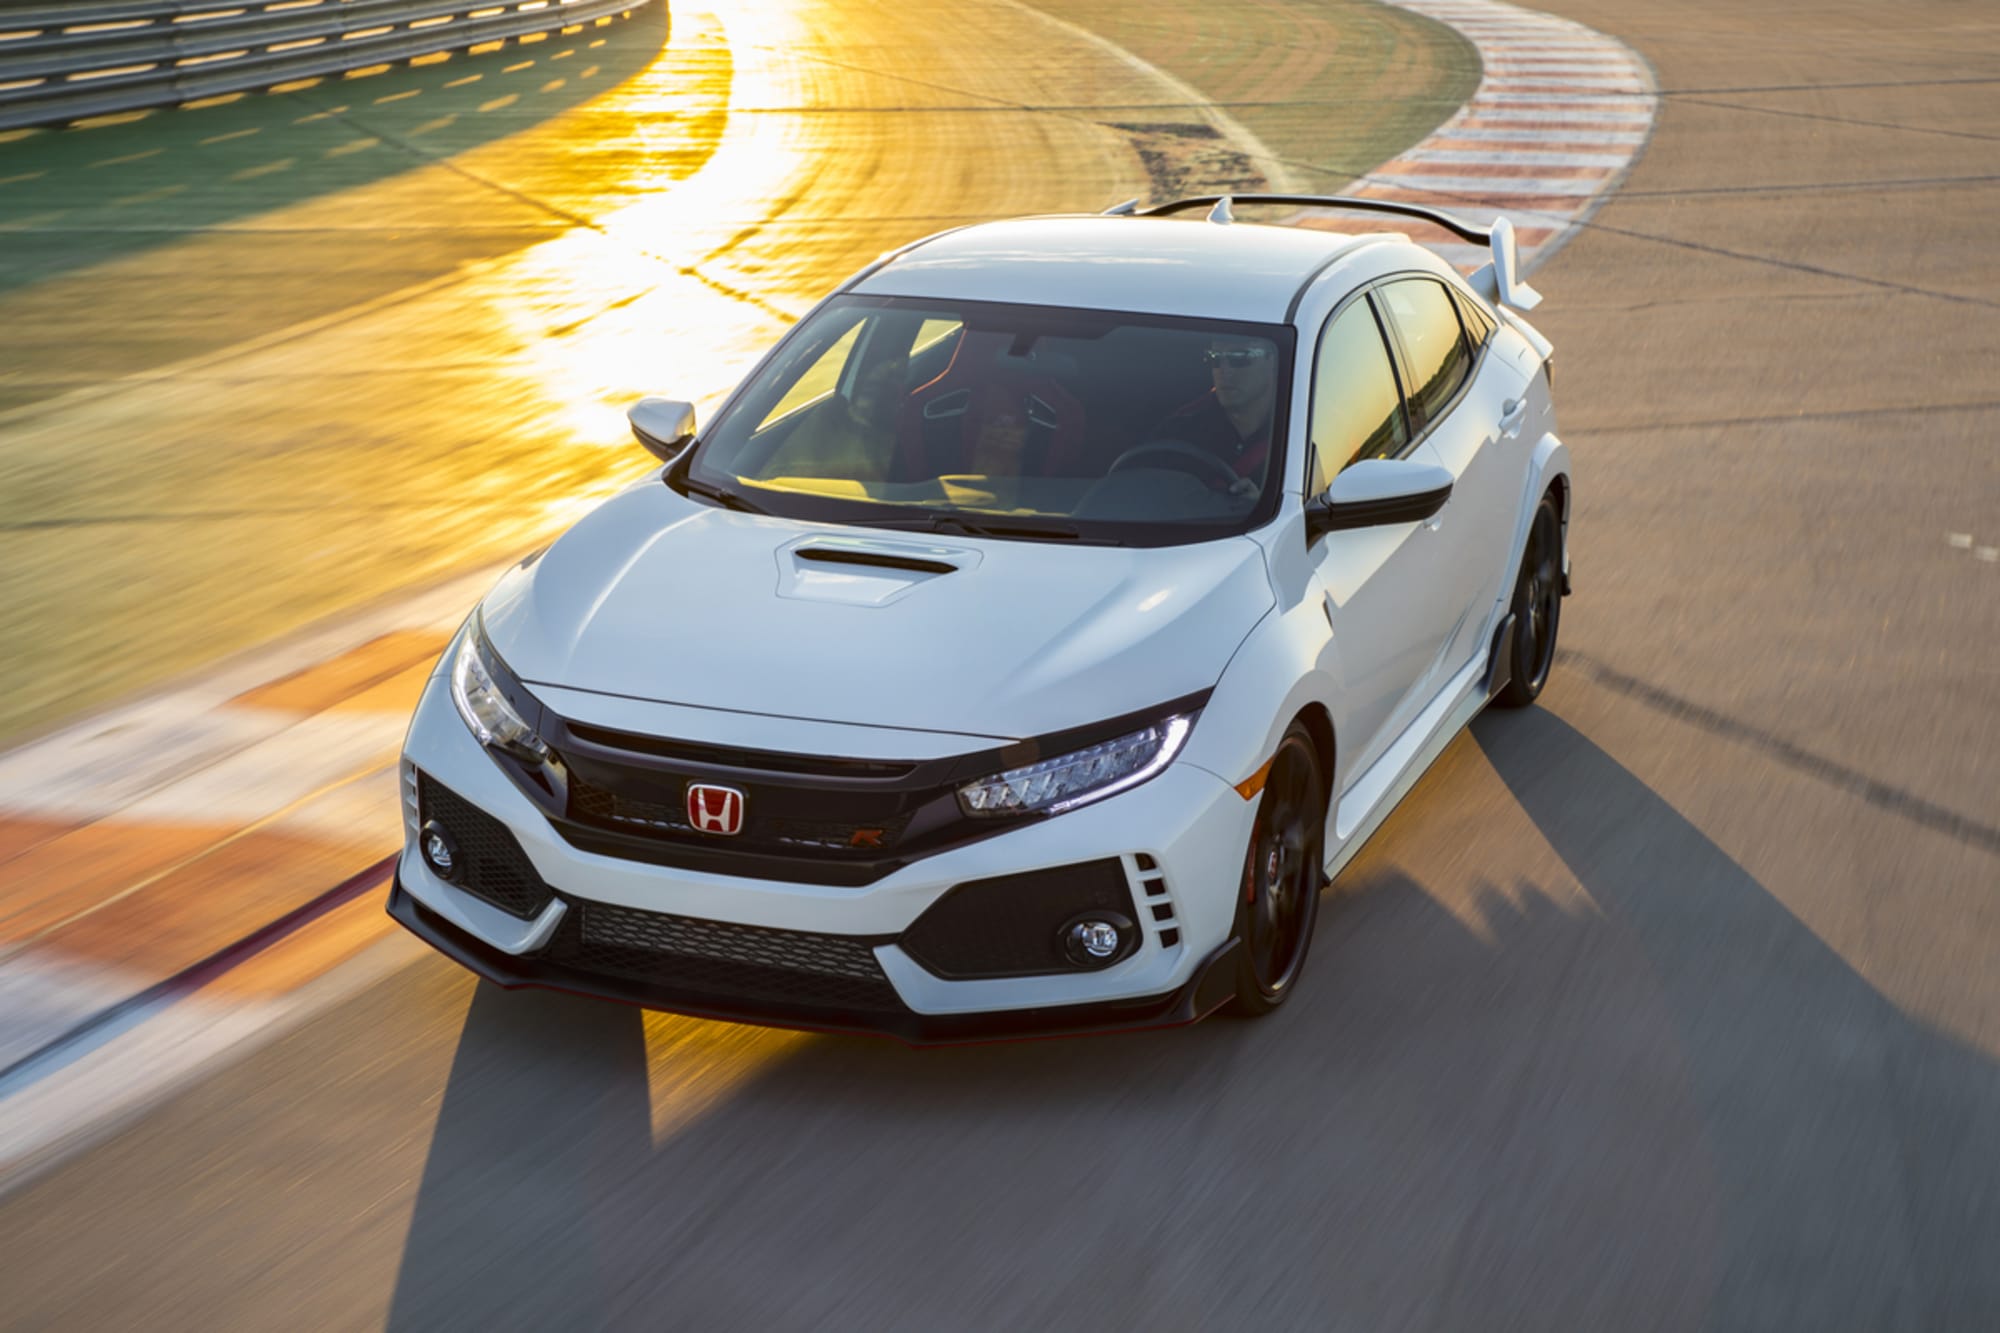 Honda Civic Type R Prices Start From 33 900 As Us Sales Begin